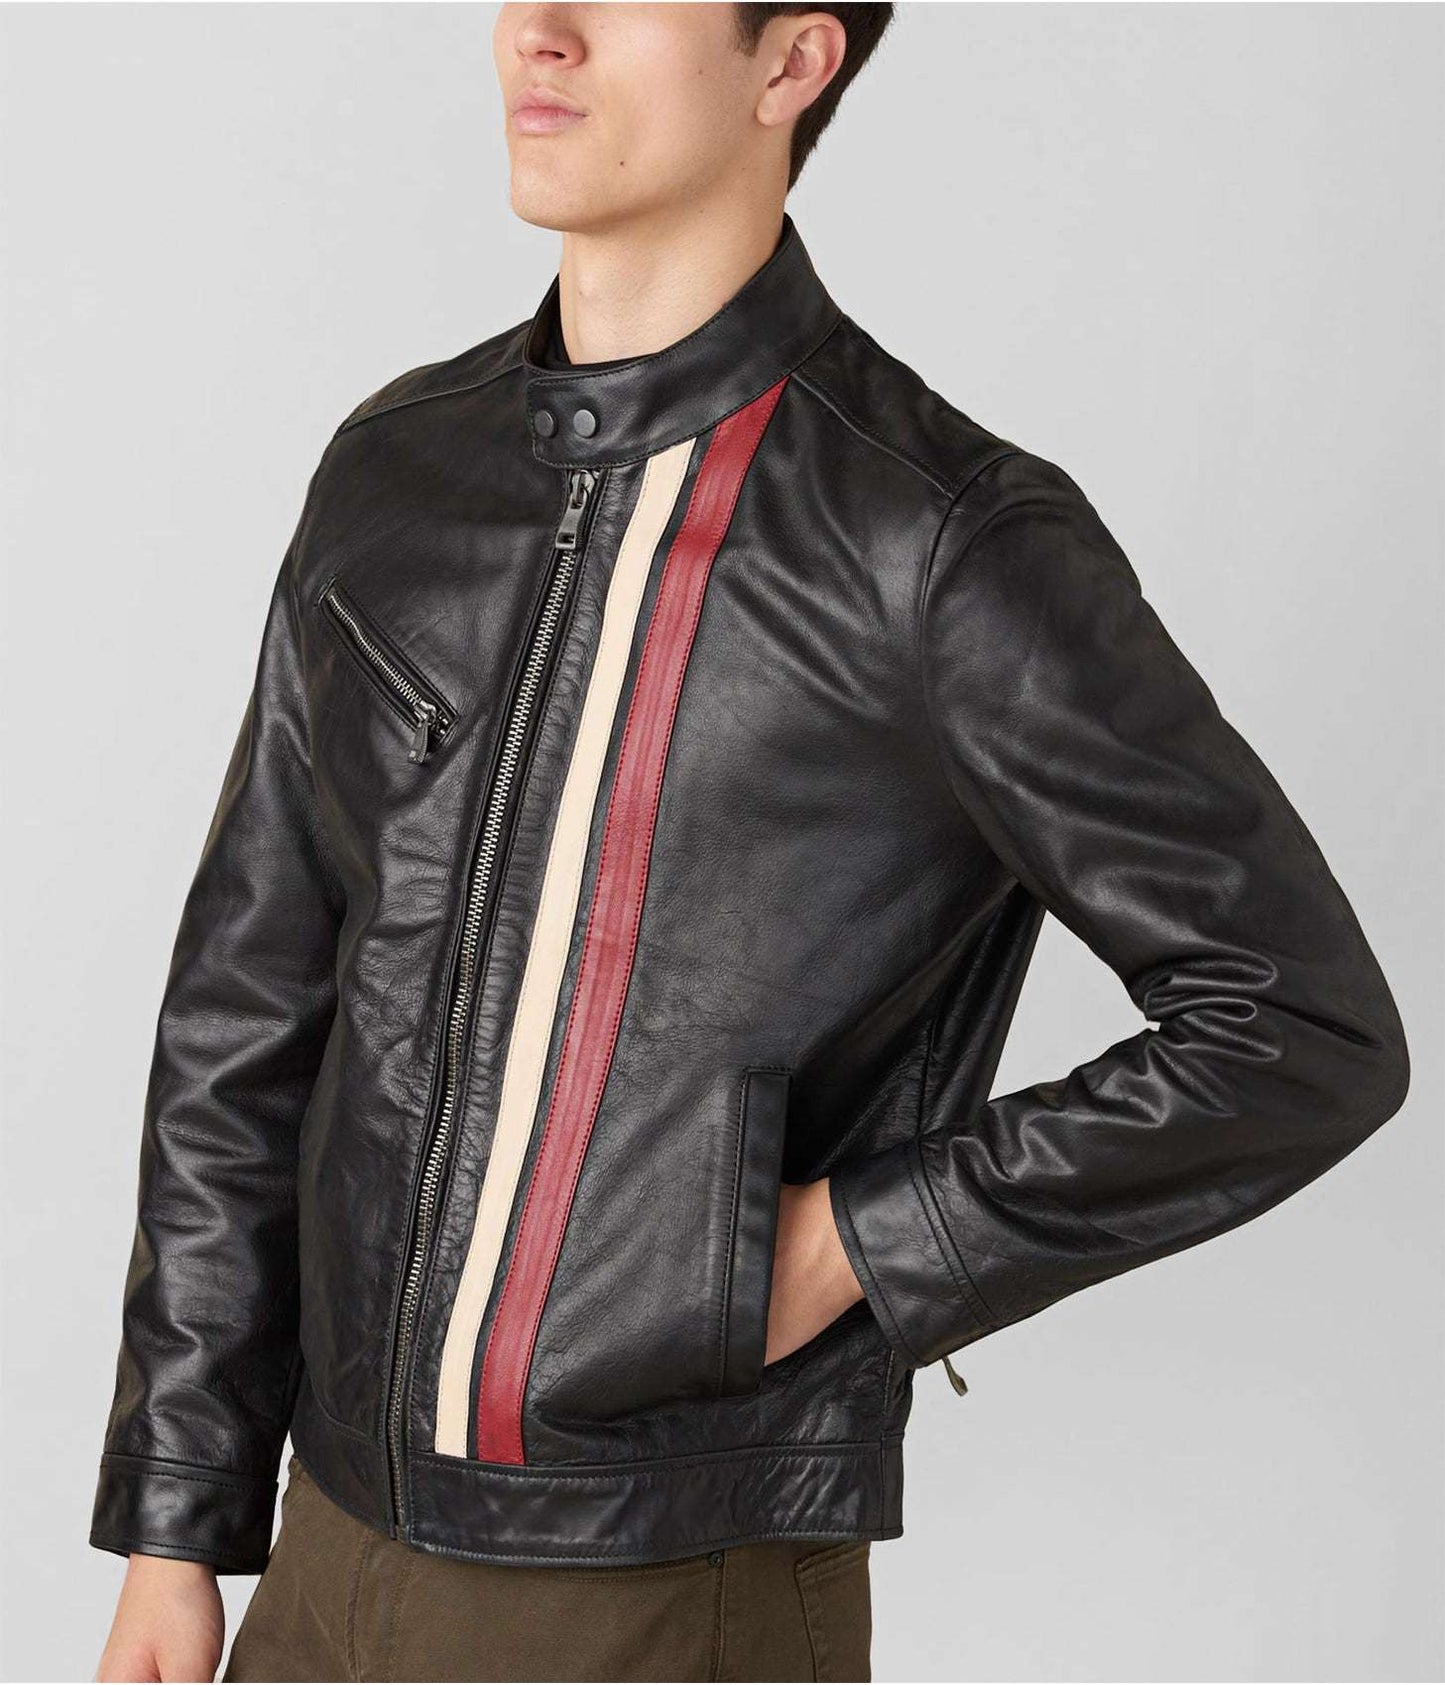 Men's Leather Moto Jacket In Black With Stripes On Front